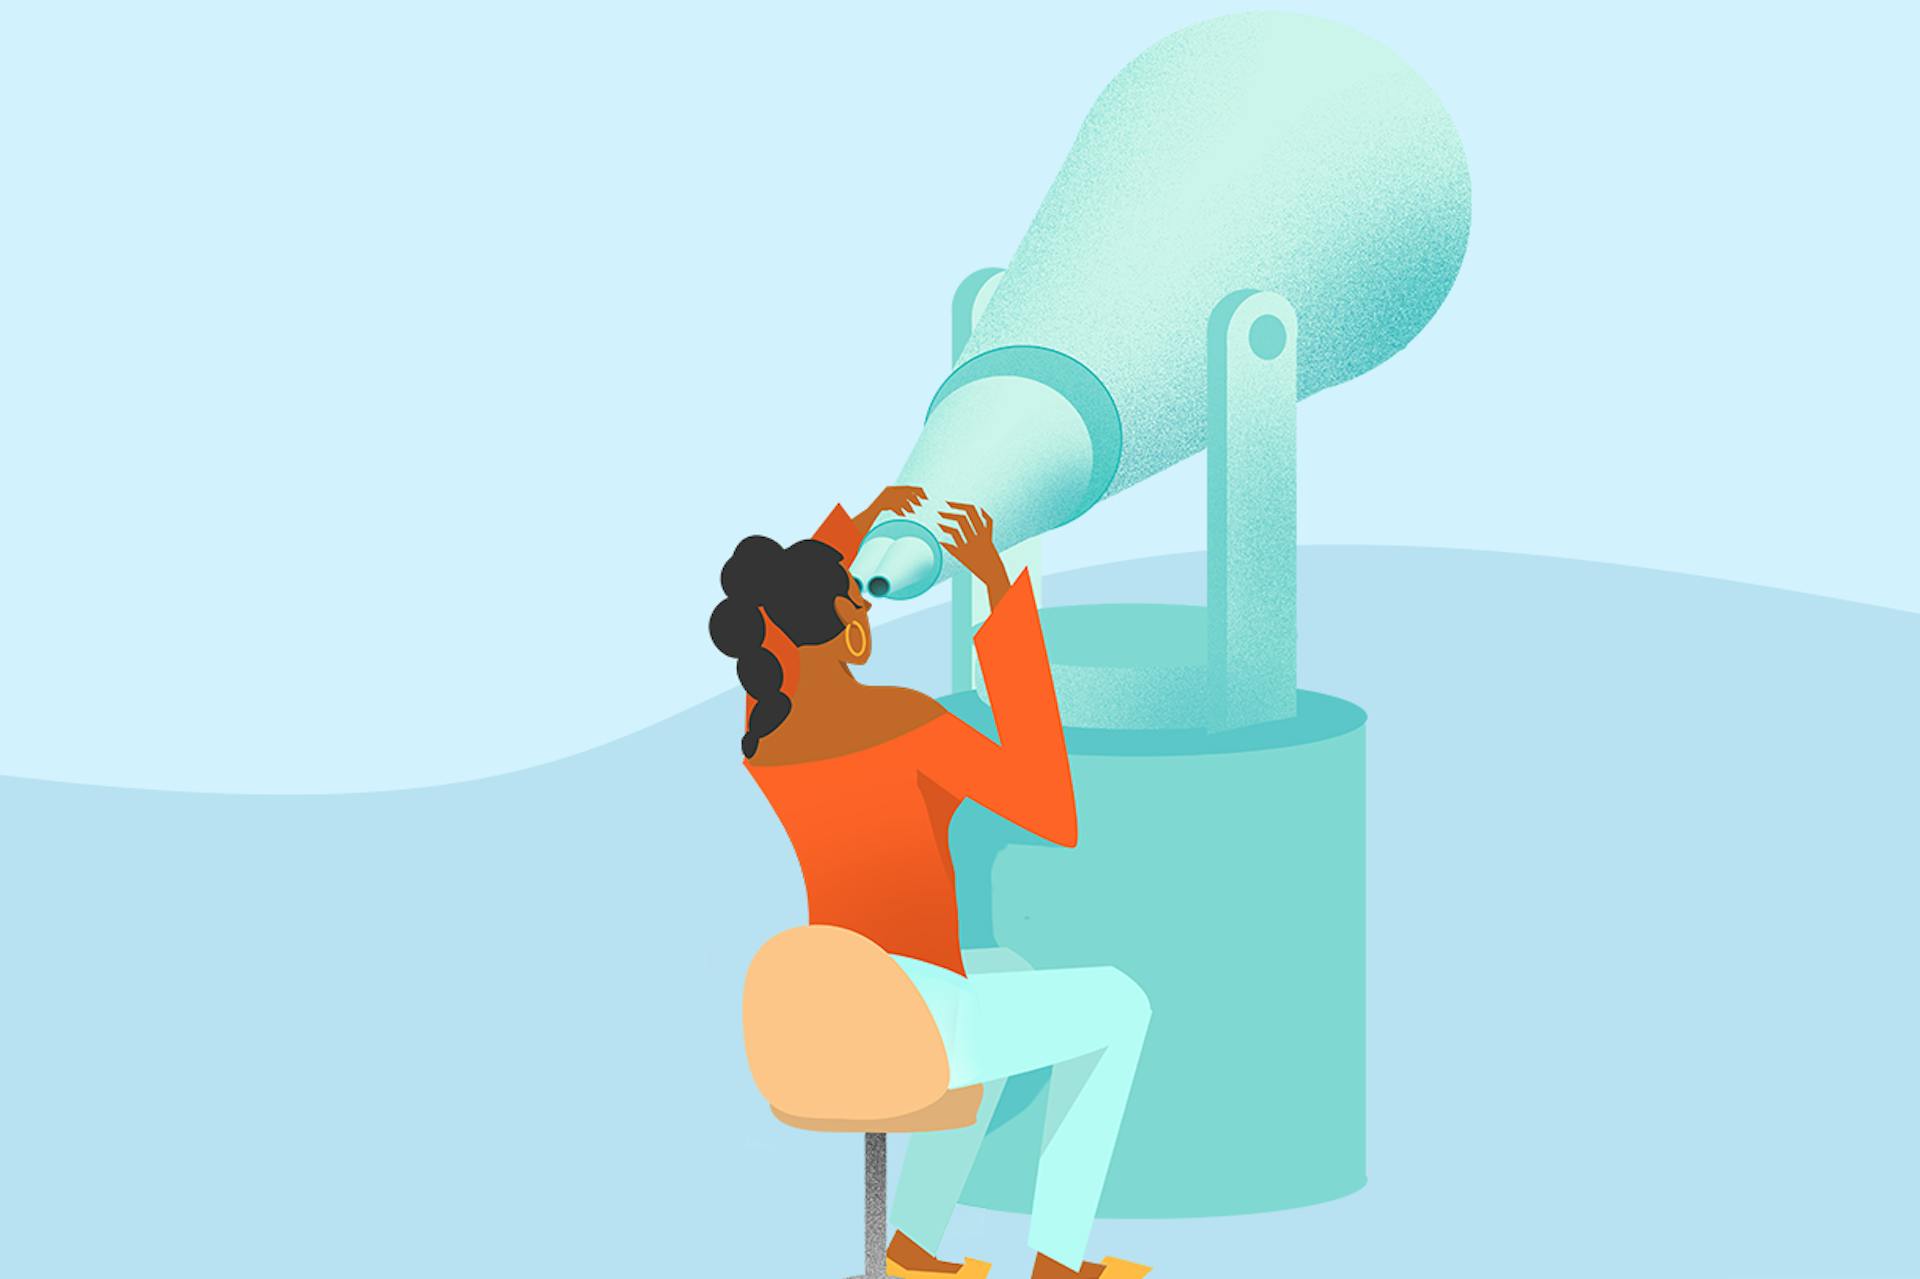 Looking for an alternative social media management solution? This image of a woman staring into a giant telescope represents how monumental that search can feel. In this blog, we explore alternative social media solutions to Hootsuite.